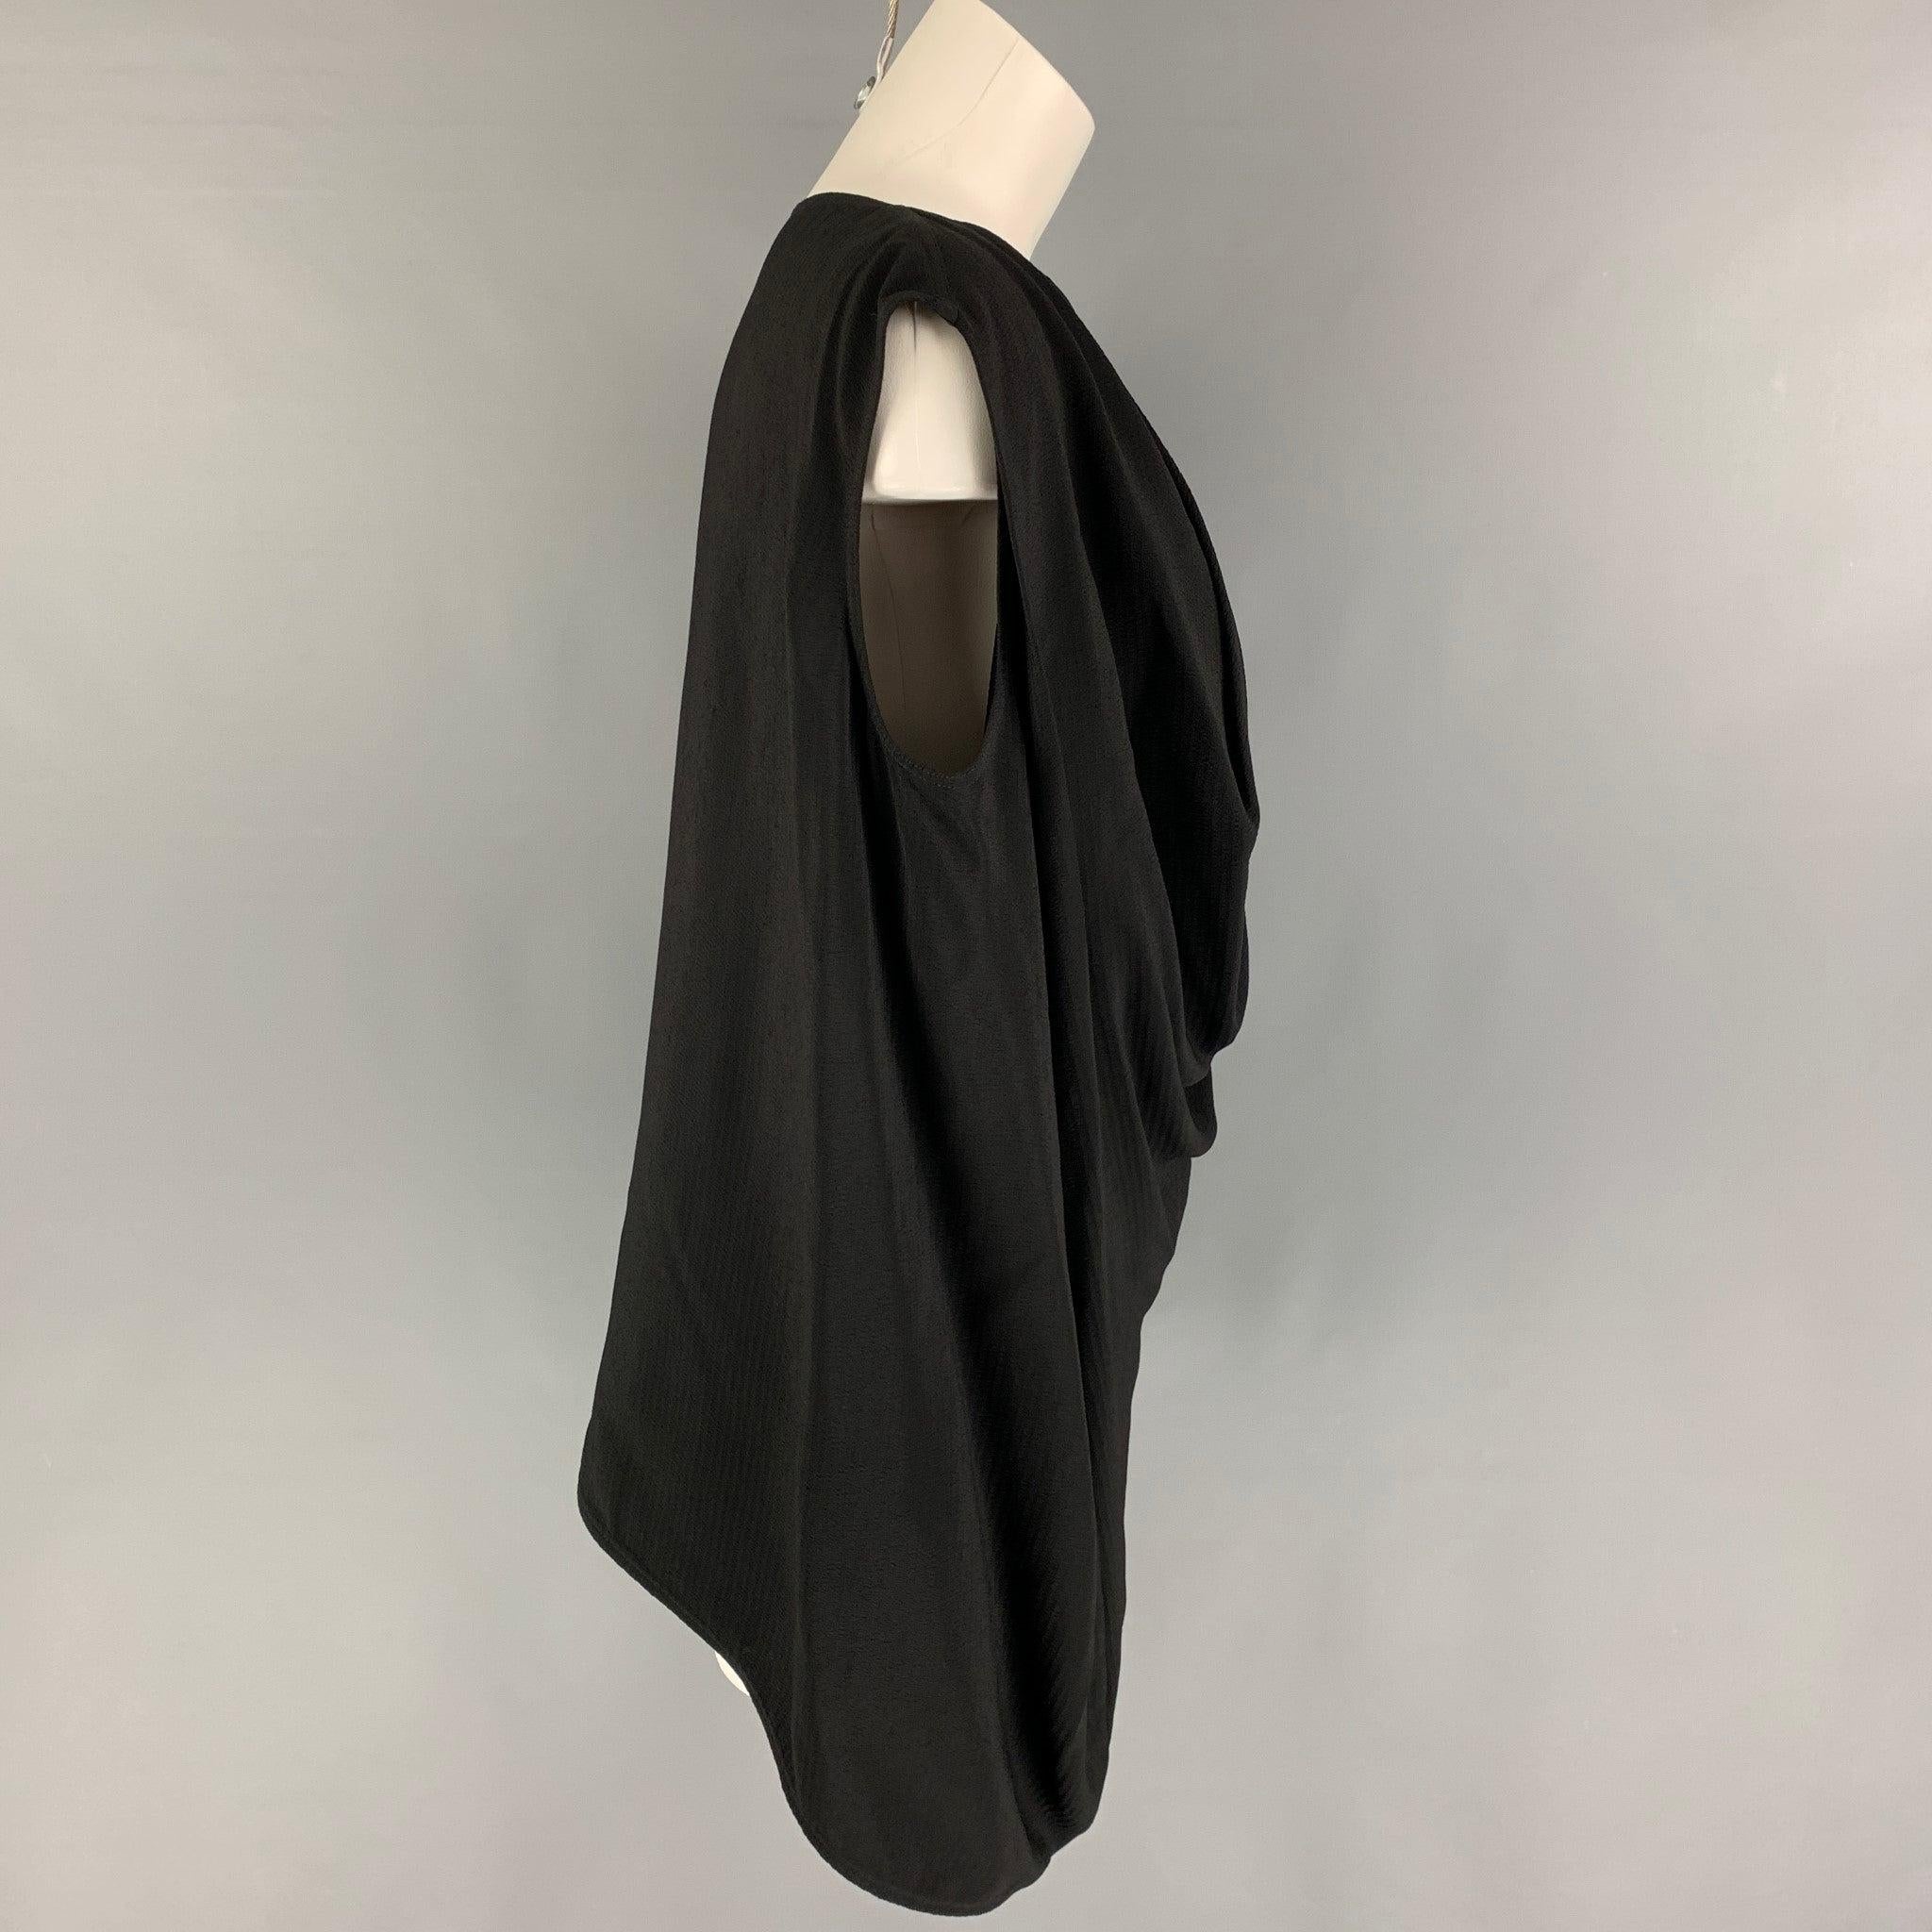 RICK OWENS 'GLITTER FW 17' blouse comes in a black viscose featuring a draped style, sleeveless, and a
 asymmetrical hem.
Very Good
Pre-Owned Condition. 

Marked:   8 

Measurements: 
 
Shoulder: 17.5 inches  Bust: 42 inches  Length: 26 inches 
  
 